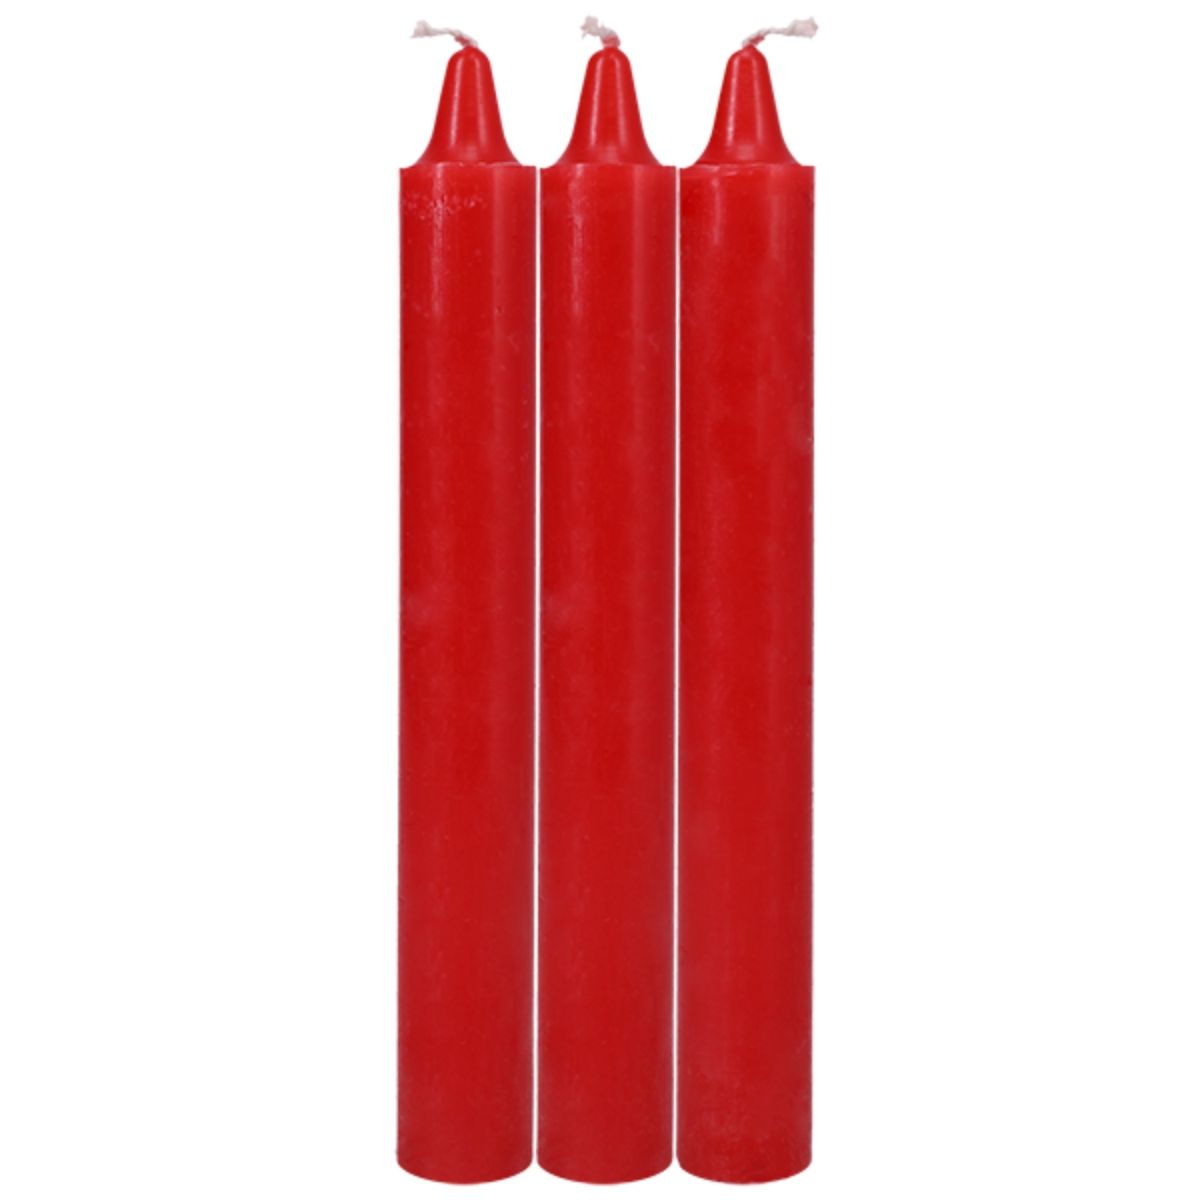 DOC JOHNSON Japanese Drip Candles, 3 Pack | Red